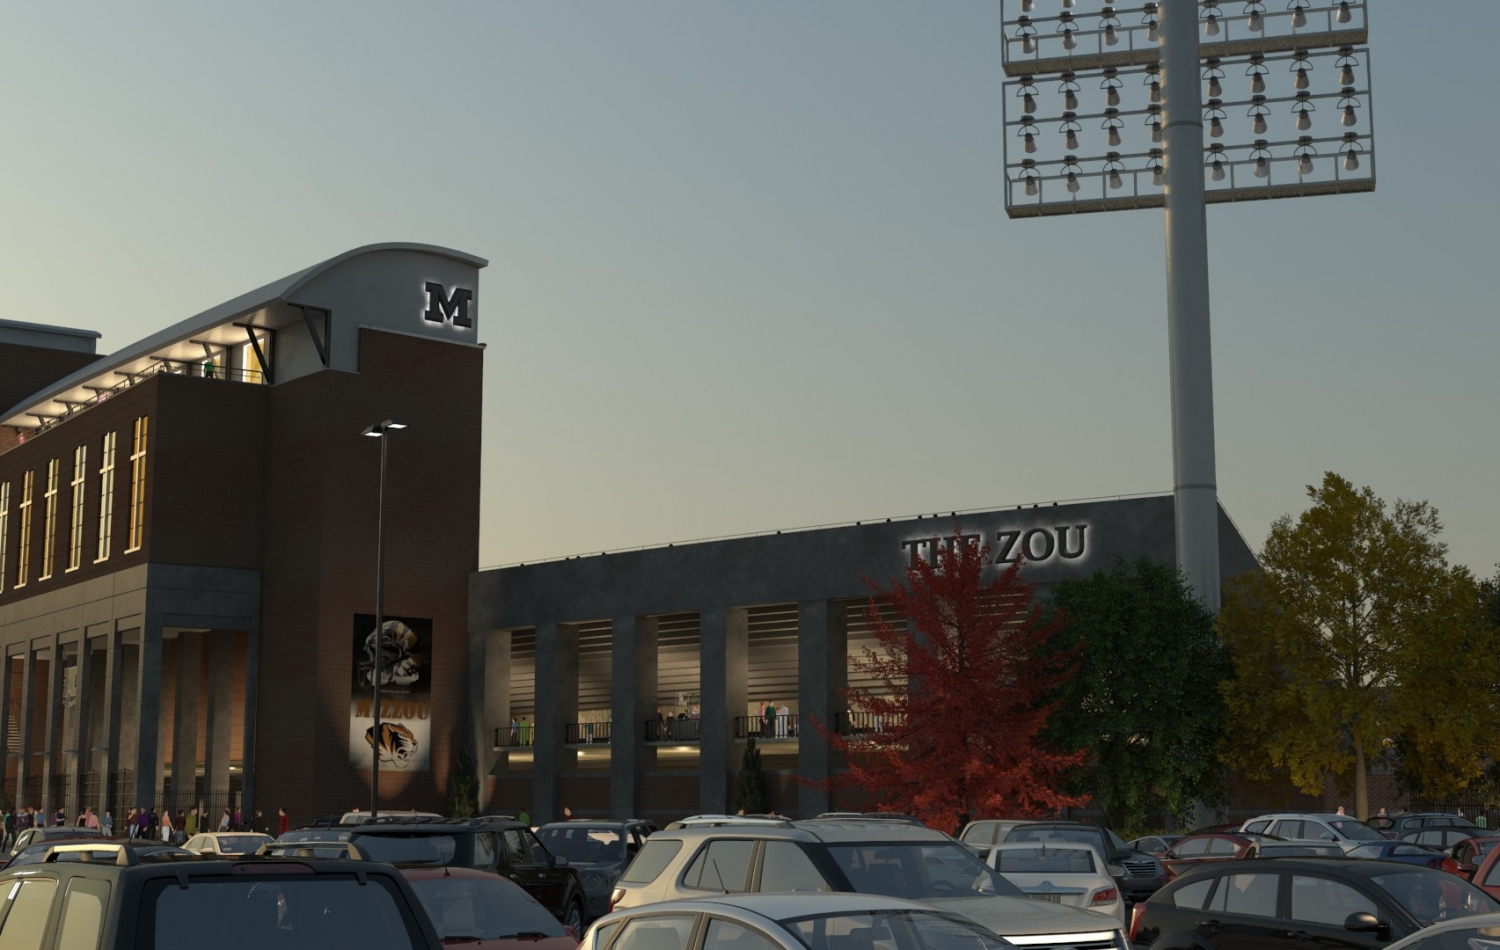 A human eye level sample of Trinity 3D stadium renderings for the Mizzou project.